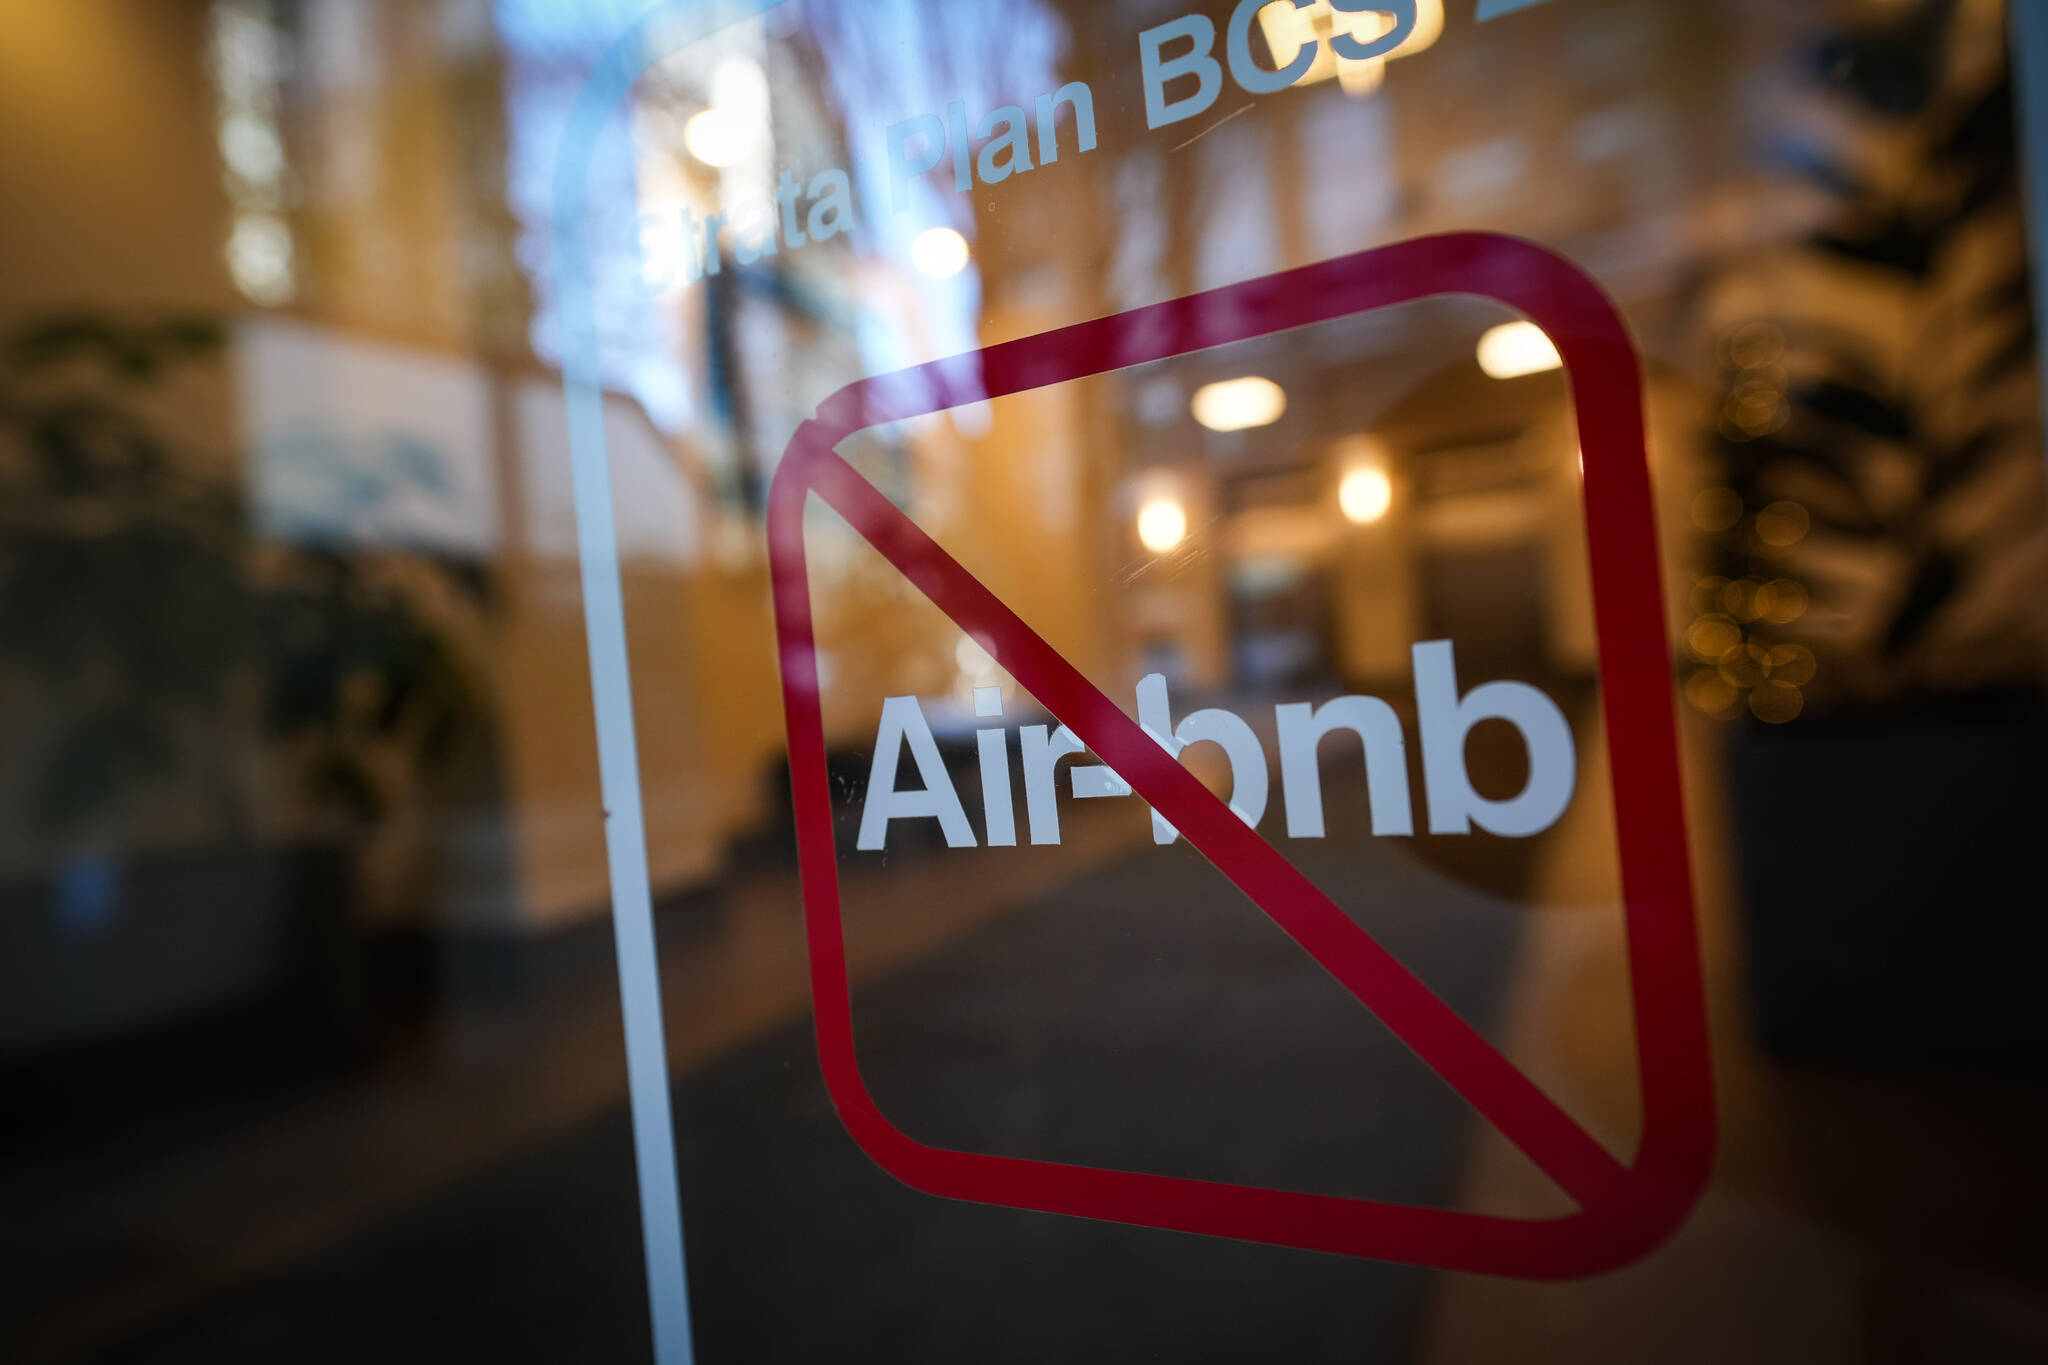 A sign indicating Airbnb rentals are not permitted is seen at the entrance to a condo tower, in Vancouver, on Thursday, November 23, 2023. The provincial government last month introduced legislation to limit short-term rentals in many cities in British Columbia in an effort to put thousands of units back into the long-term rental pool, with the changes coming into effect in May. THE CANADIAN PRESS/Darryl Dyck